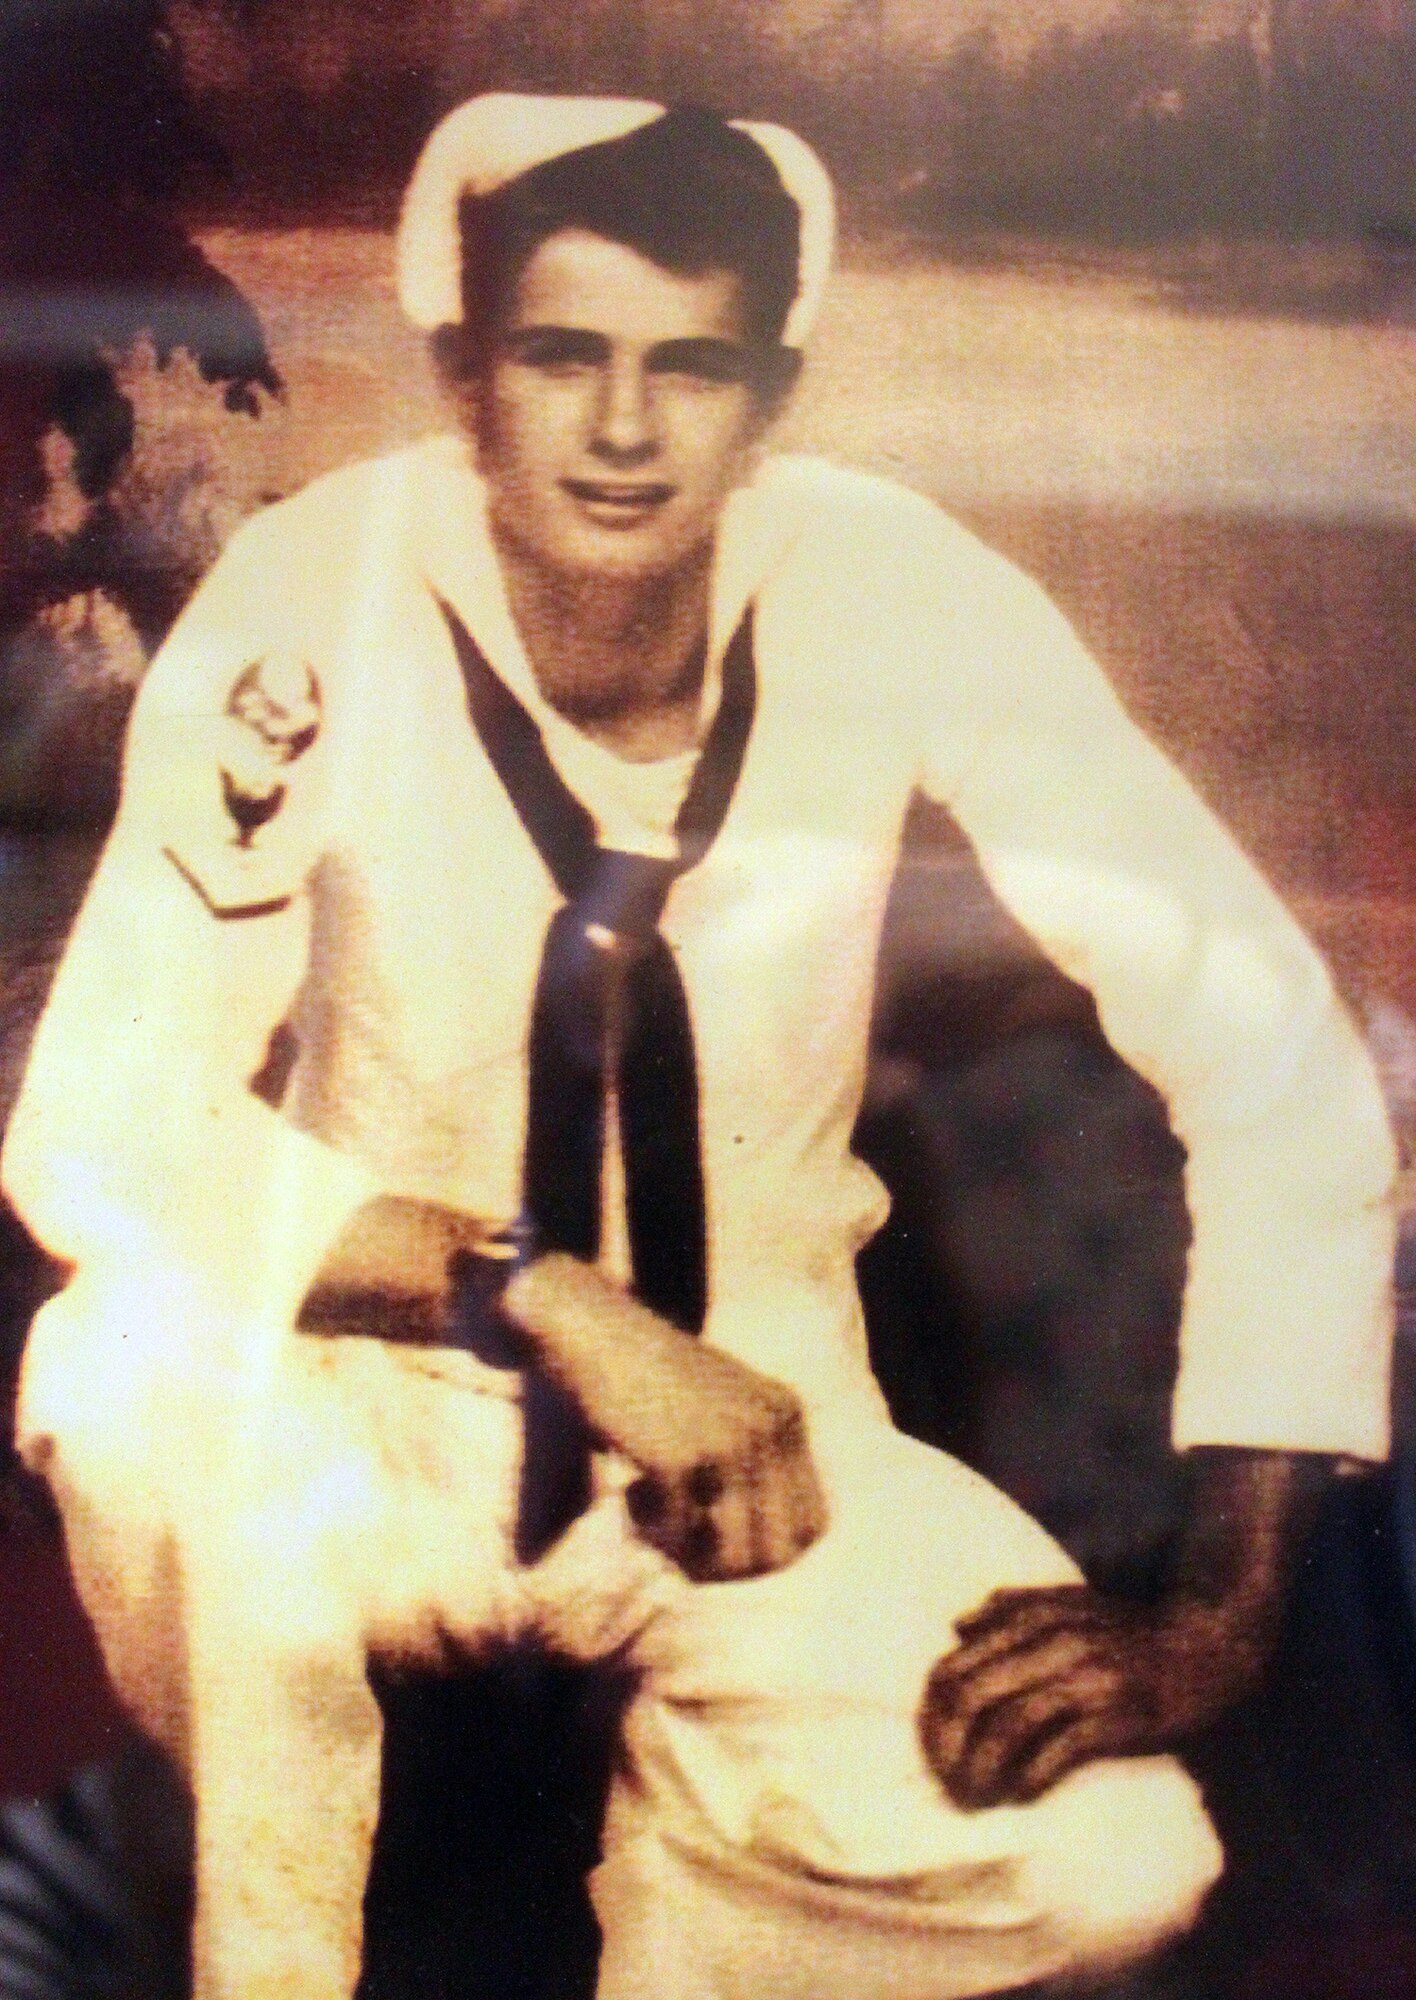 William Thames, whose name is pronounced like the river in England, joined the Navy in 1944. His unit, the 37th Special Construction Battalion, was sent to California by train. For what seemed like an eternity, Thames outfitted ships with white pine board. Thames, now 88, married Doris Youngblood and the pair have been married for 63 years. (U.S. Air Force photo by Angela Woolen)